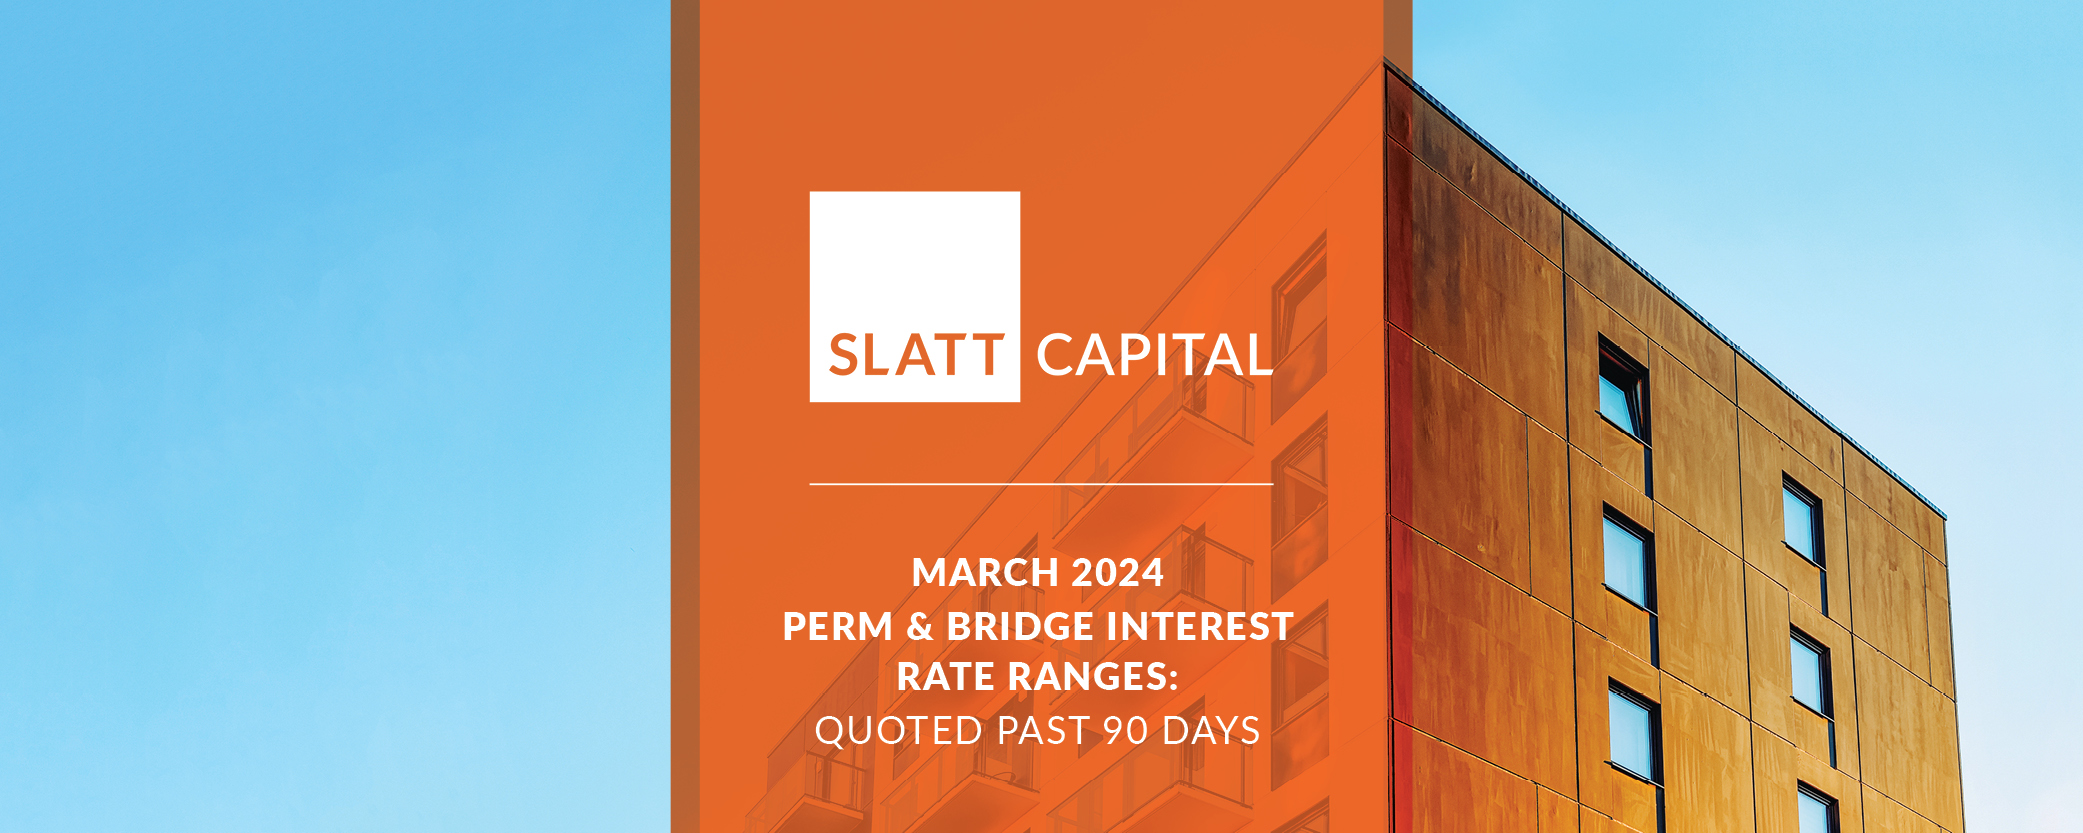 March 2024 interest rate ranges: quoted past 90 days